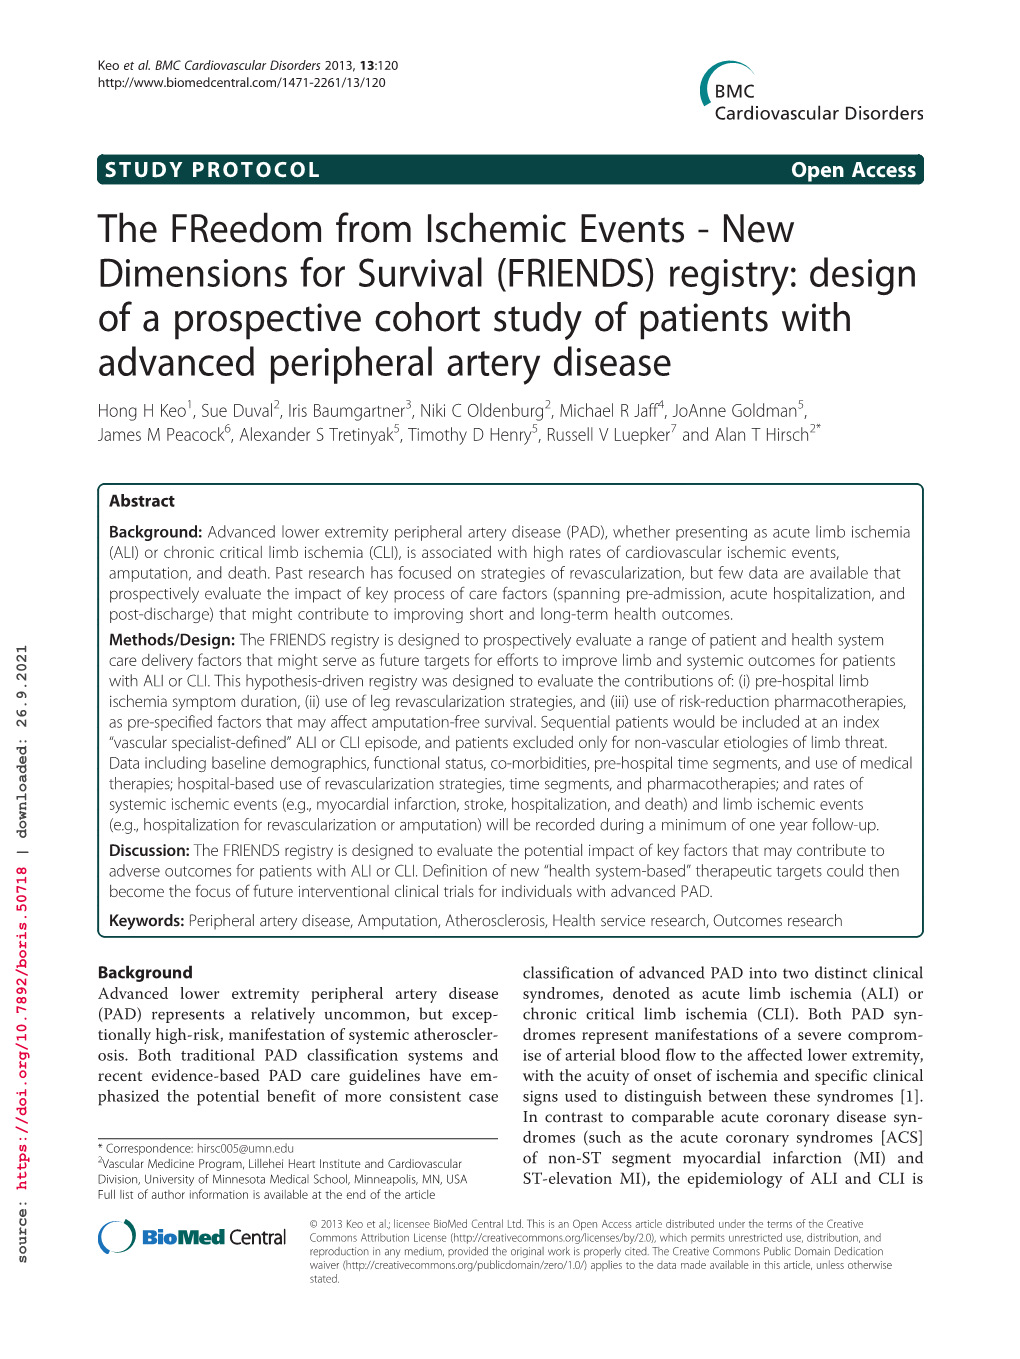 The Freedom from Ischemic Events